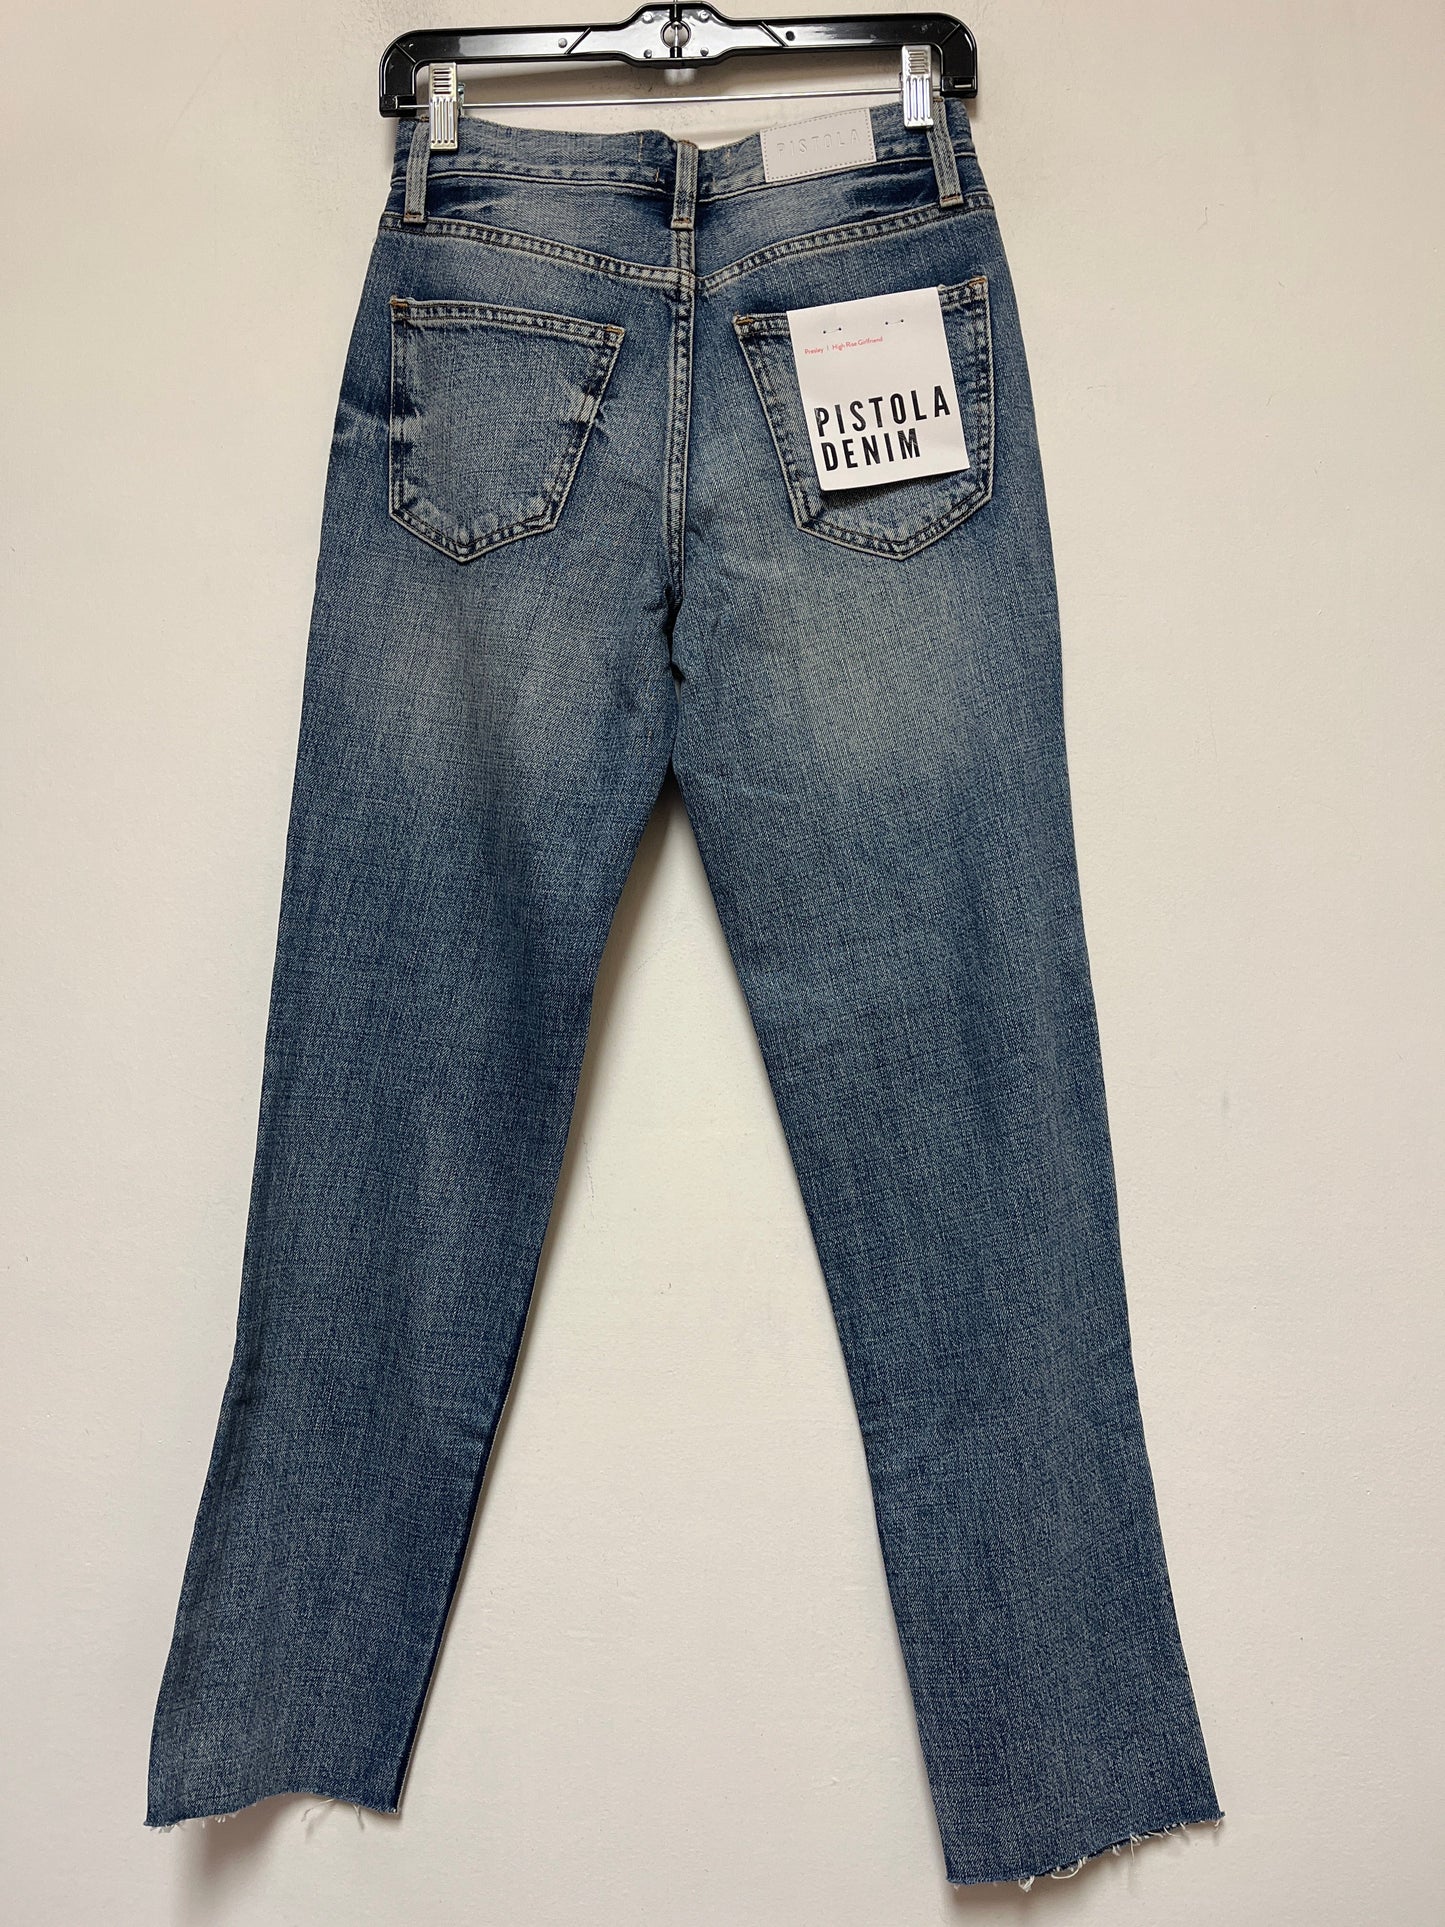 Jeans Straight By Pistola  Size: 2